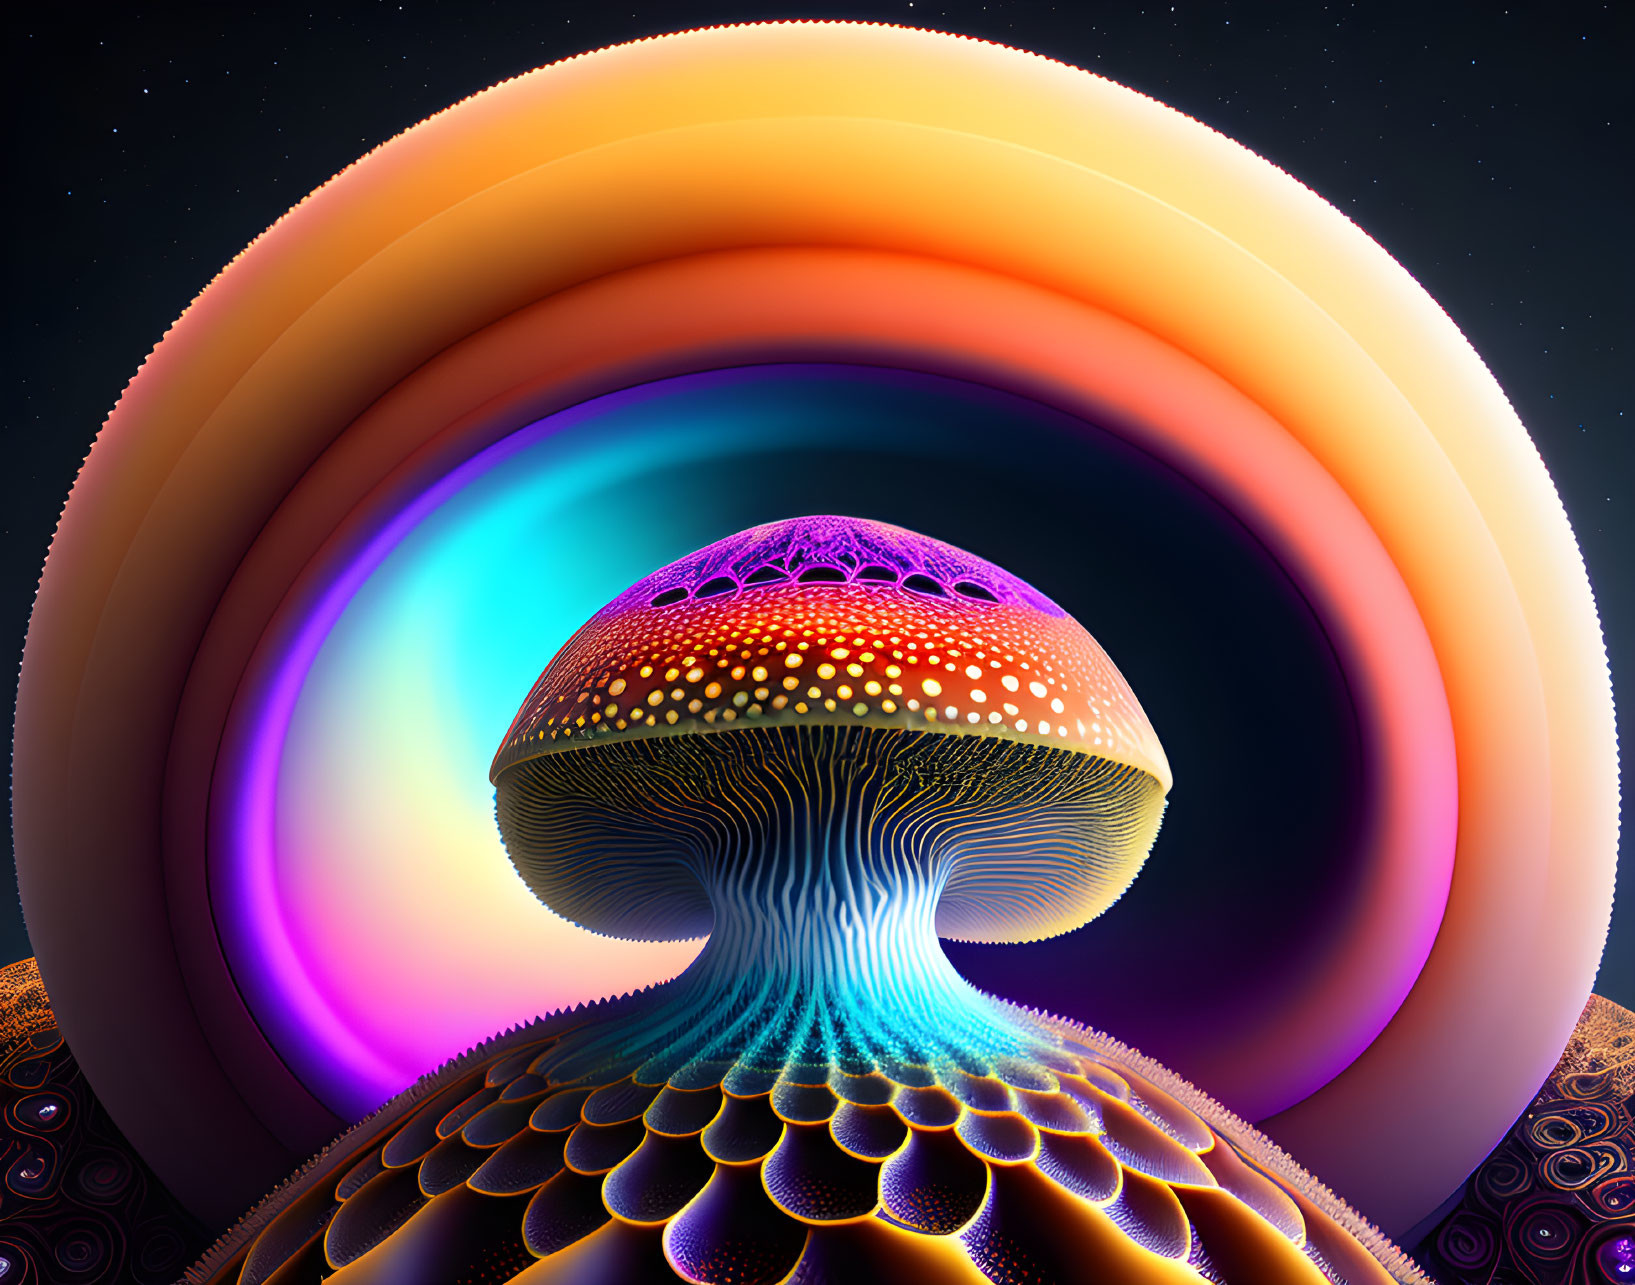 Colorful Psychedelic Mushroom Artwork Under Rainbow Arches